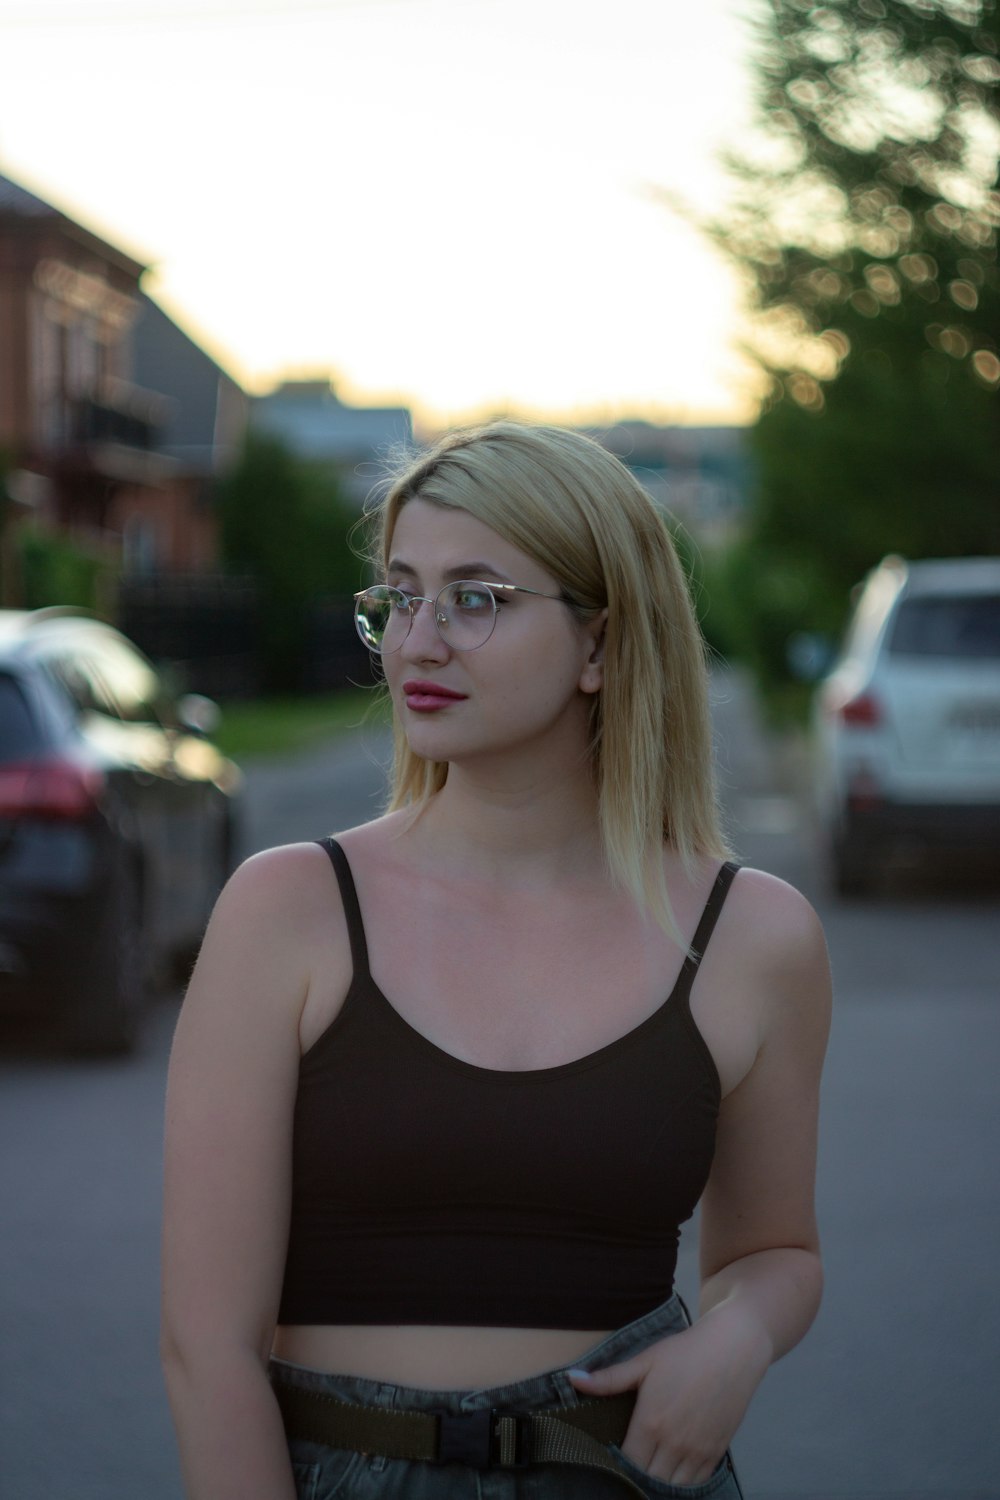 a woman with glasses is standing on the street